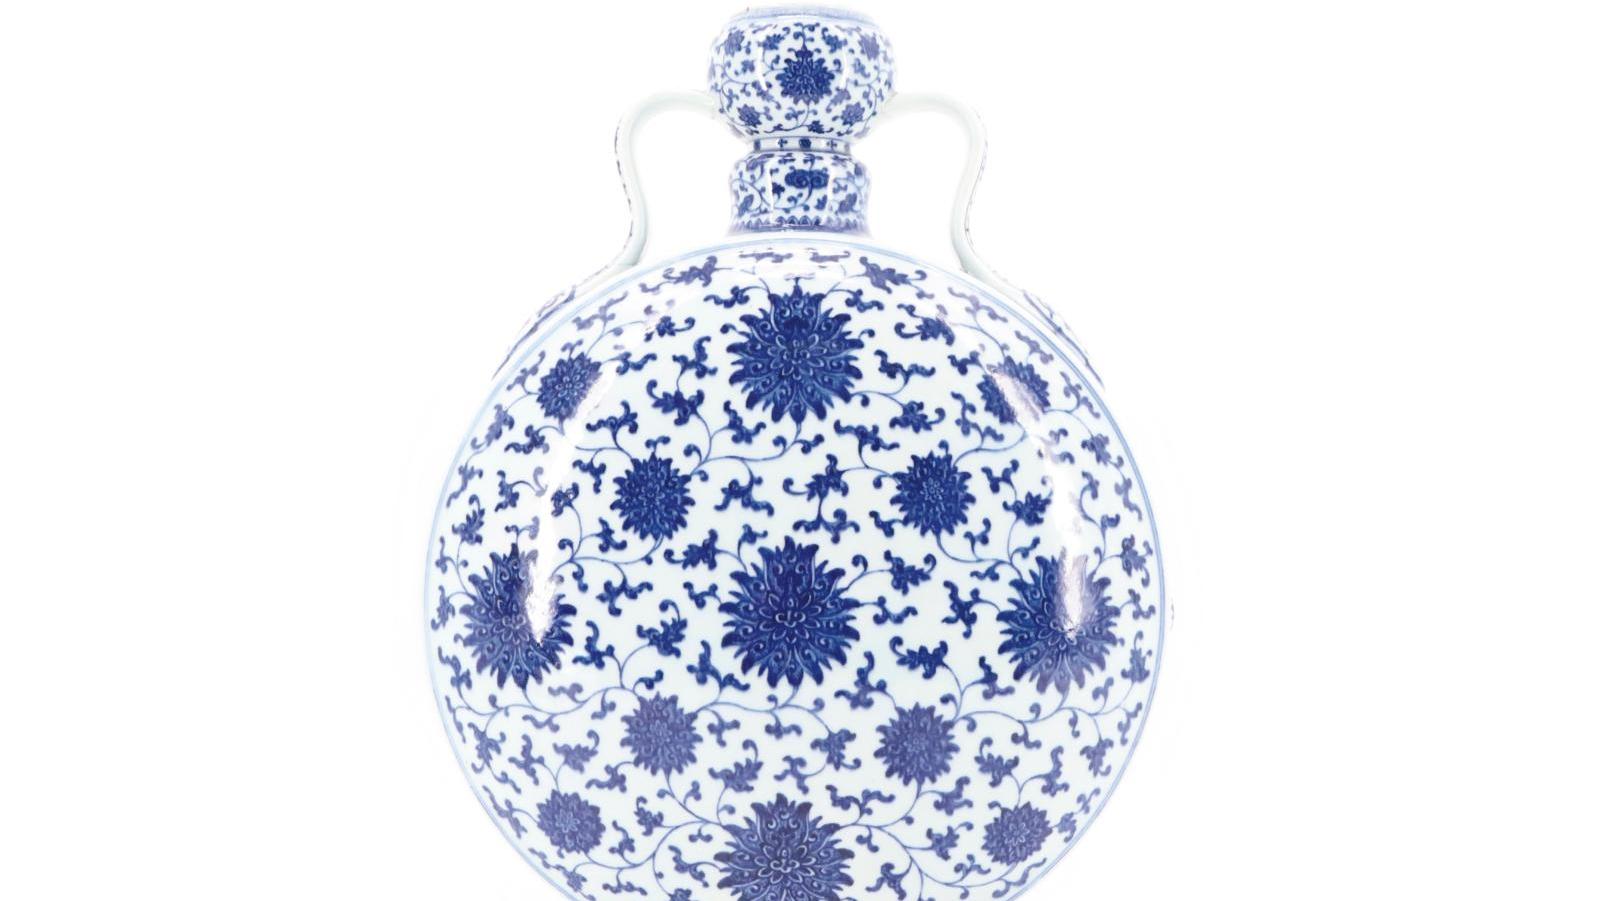 China 18th century, Qianlong period (1736-1795). Porcelain "bianhu" flask vase, blue... The Moon’s Influence on Chinese Porcelain